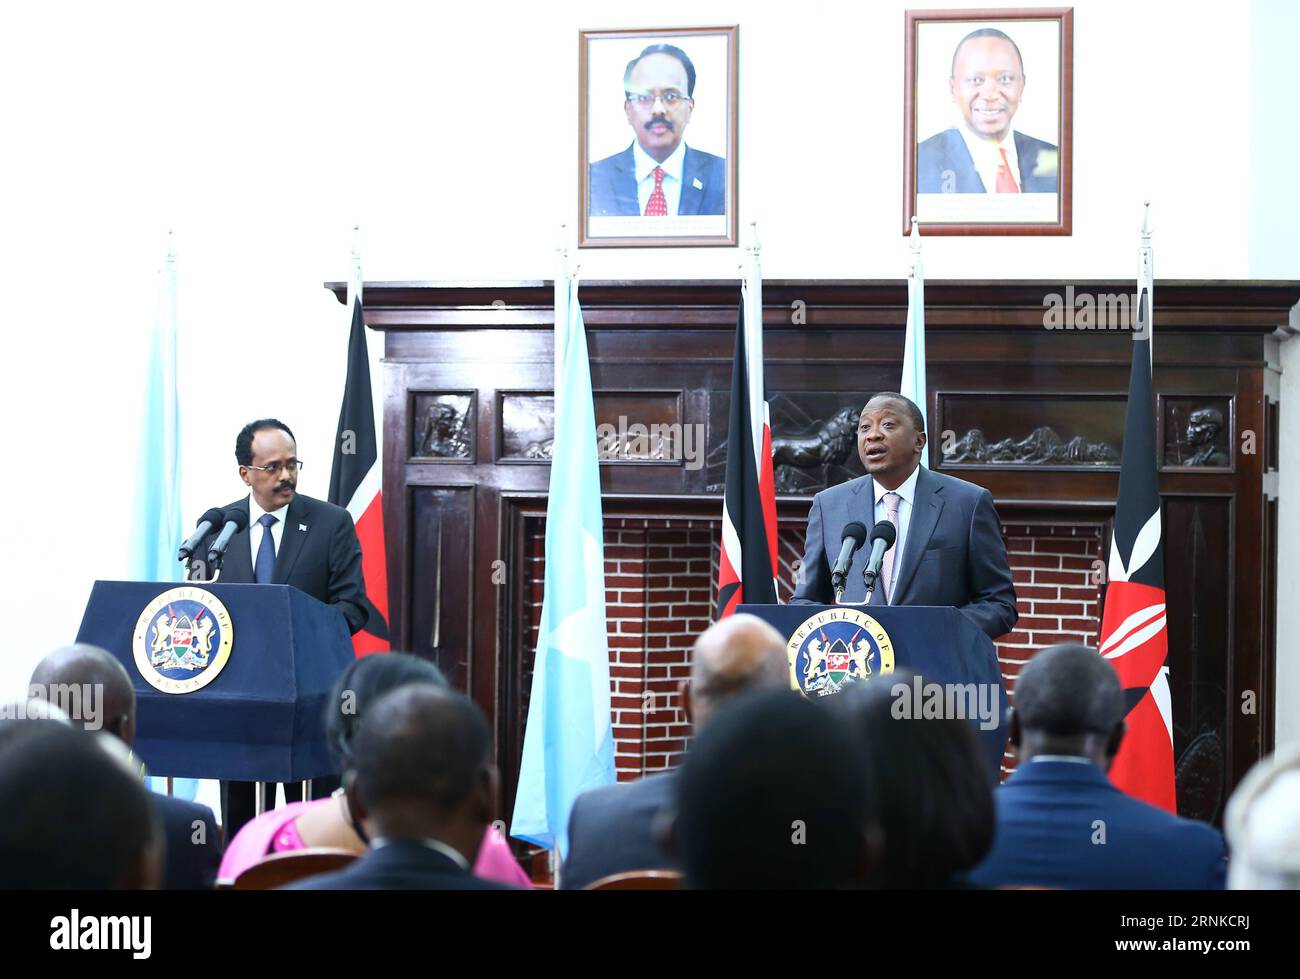 (170323) -- NAIROBI, March 23, 2017 -- Kenyan President Uhuru Kenyatta (R) and visiting Somali President Mohamed Abdullahi Mohamed attend a press conference at the State House in Nairobi, capital of Kenya, on March 23, 2017. Somali President Mohamed Abdullahi Mohamed began his first state visit to Kenya on Thursday ahead of a special summit on the Inter-Governmental Authority on Development (IGAD) to be held on Saturday. )(zhf) KANYA-NAIROBI-SOMALIA-PRESIDENT-VISIT PanxSiwei PUBLICATIONxNOTxINxCHN   Nairobi March 23 2017 Kenyan President Uhuru Kenyatta r and Visiting Somali President Mohamed A Stock Photo